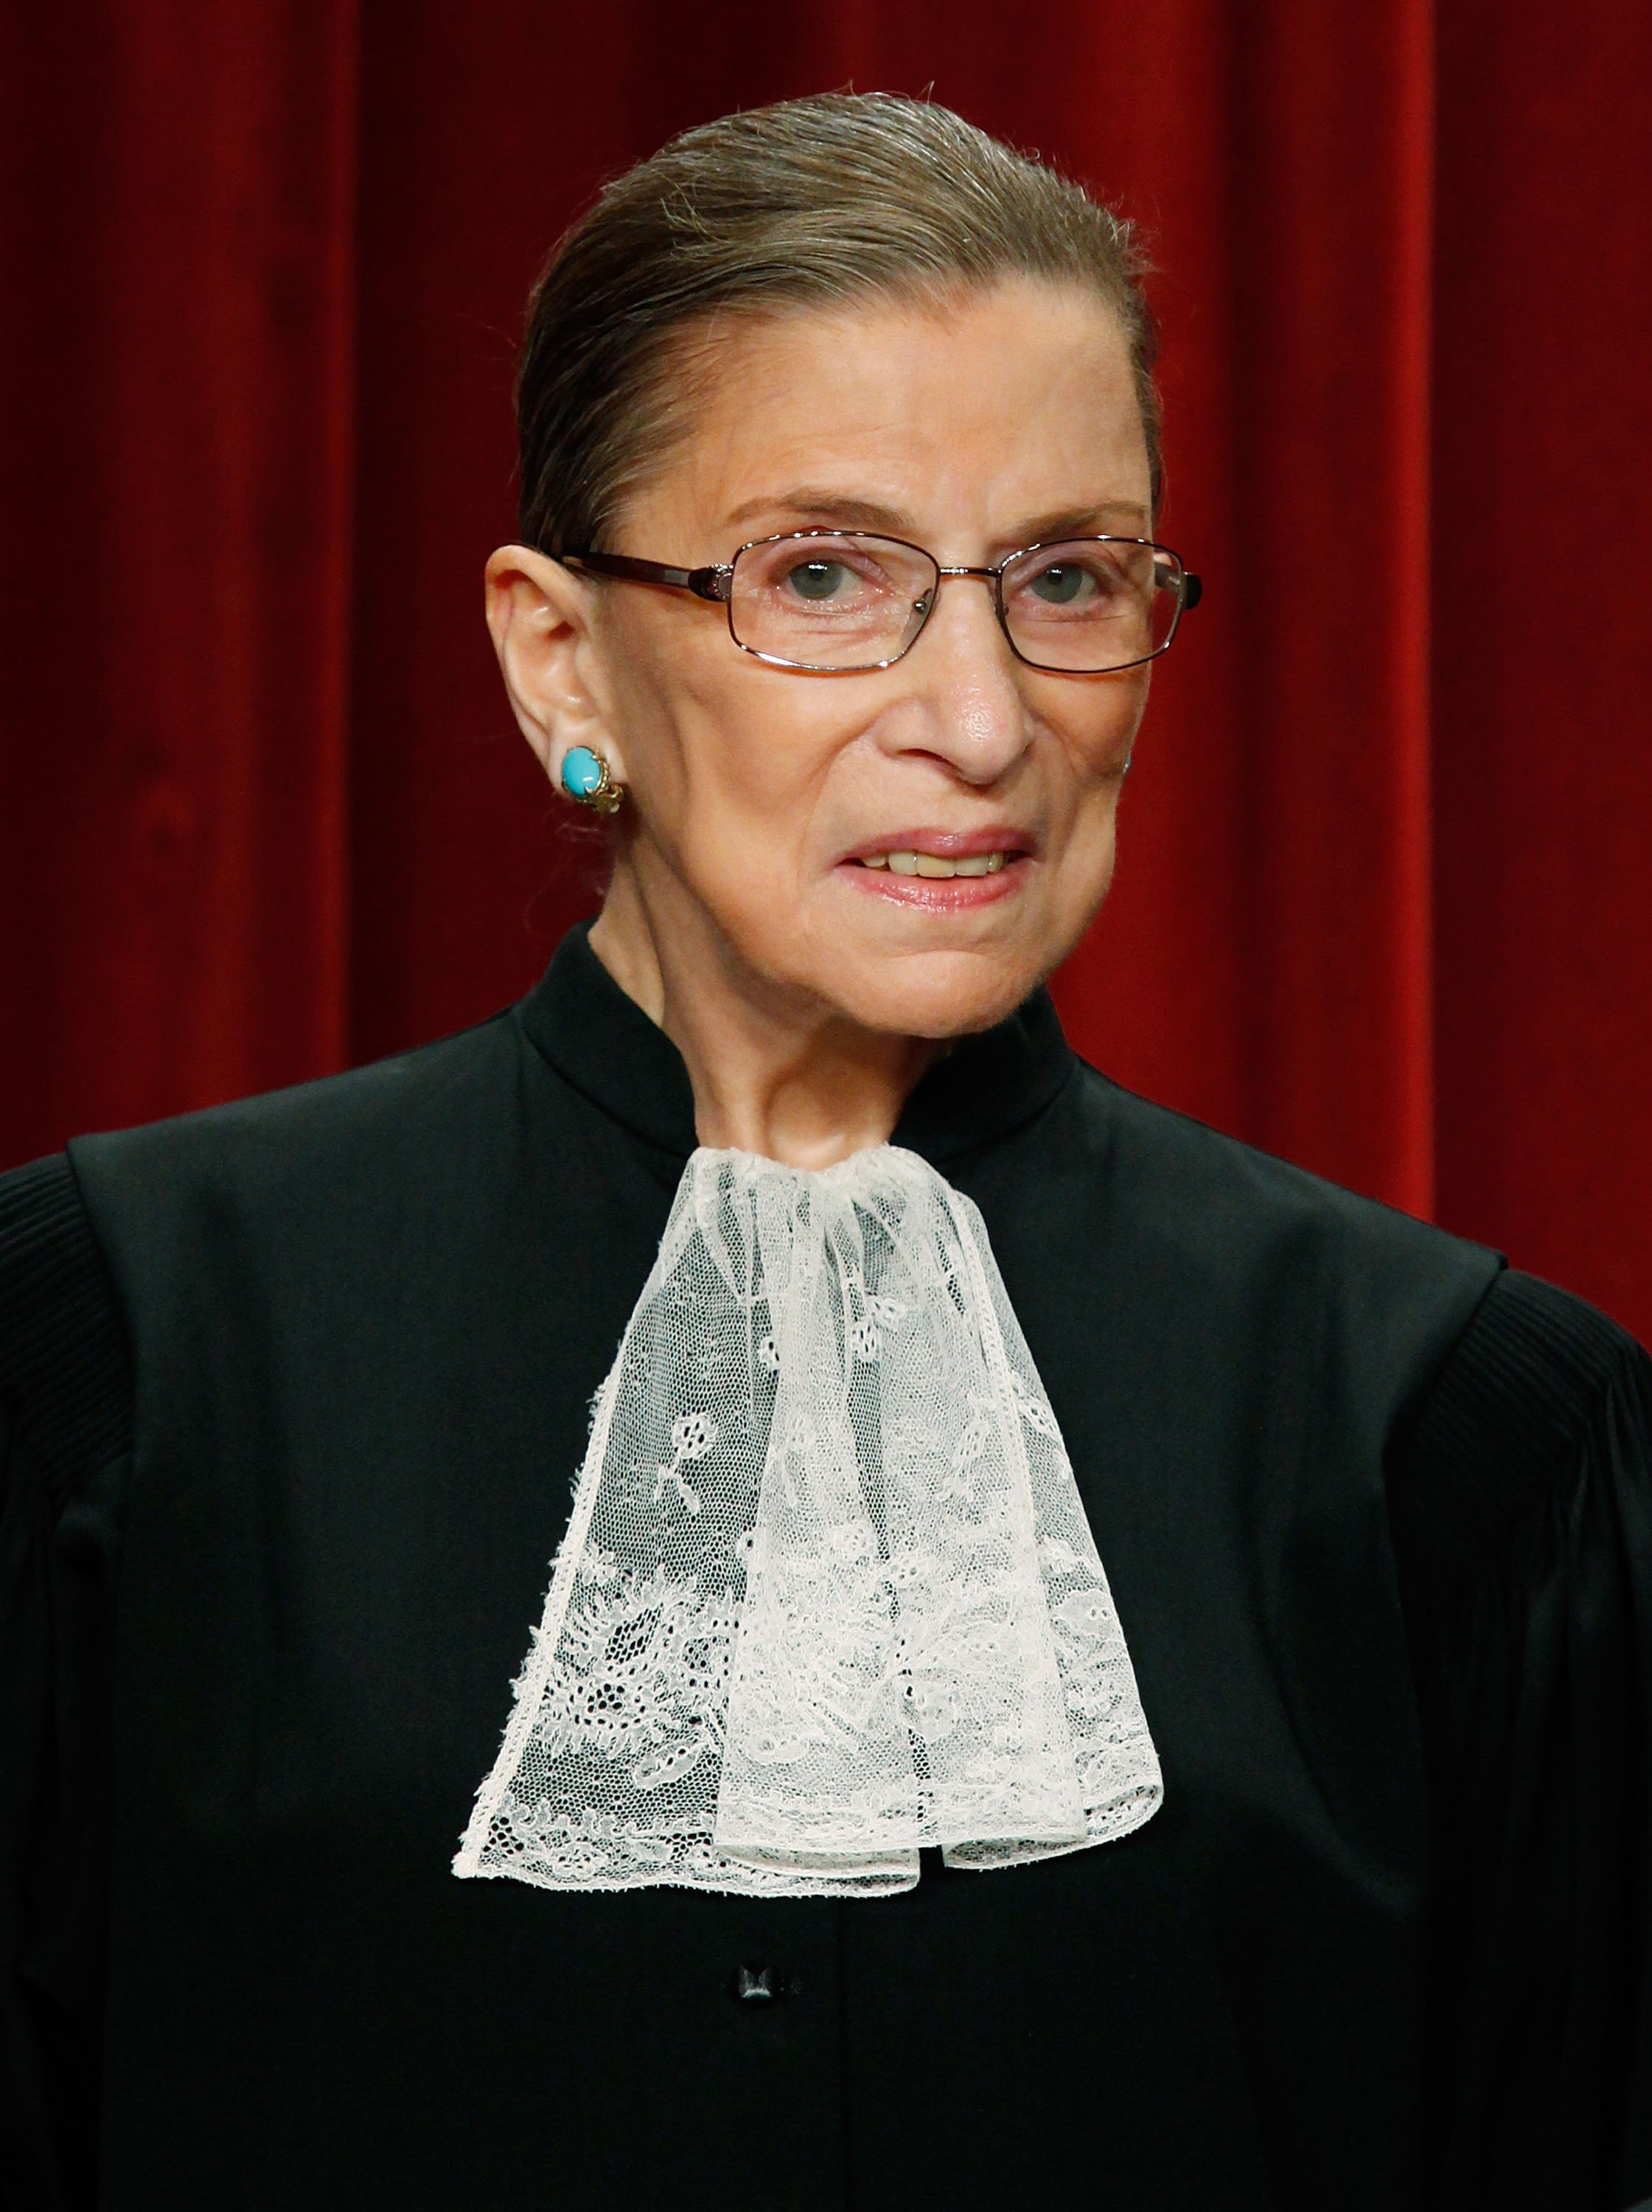  Supreme Court Justice Ruth Bader Ginsburg on September 29, 2009 in Washington D.C | Source: Getty Images